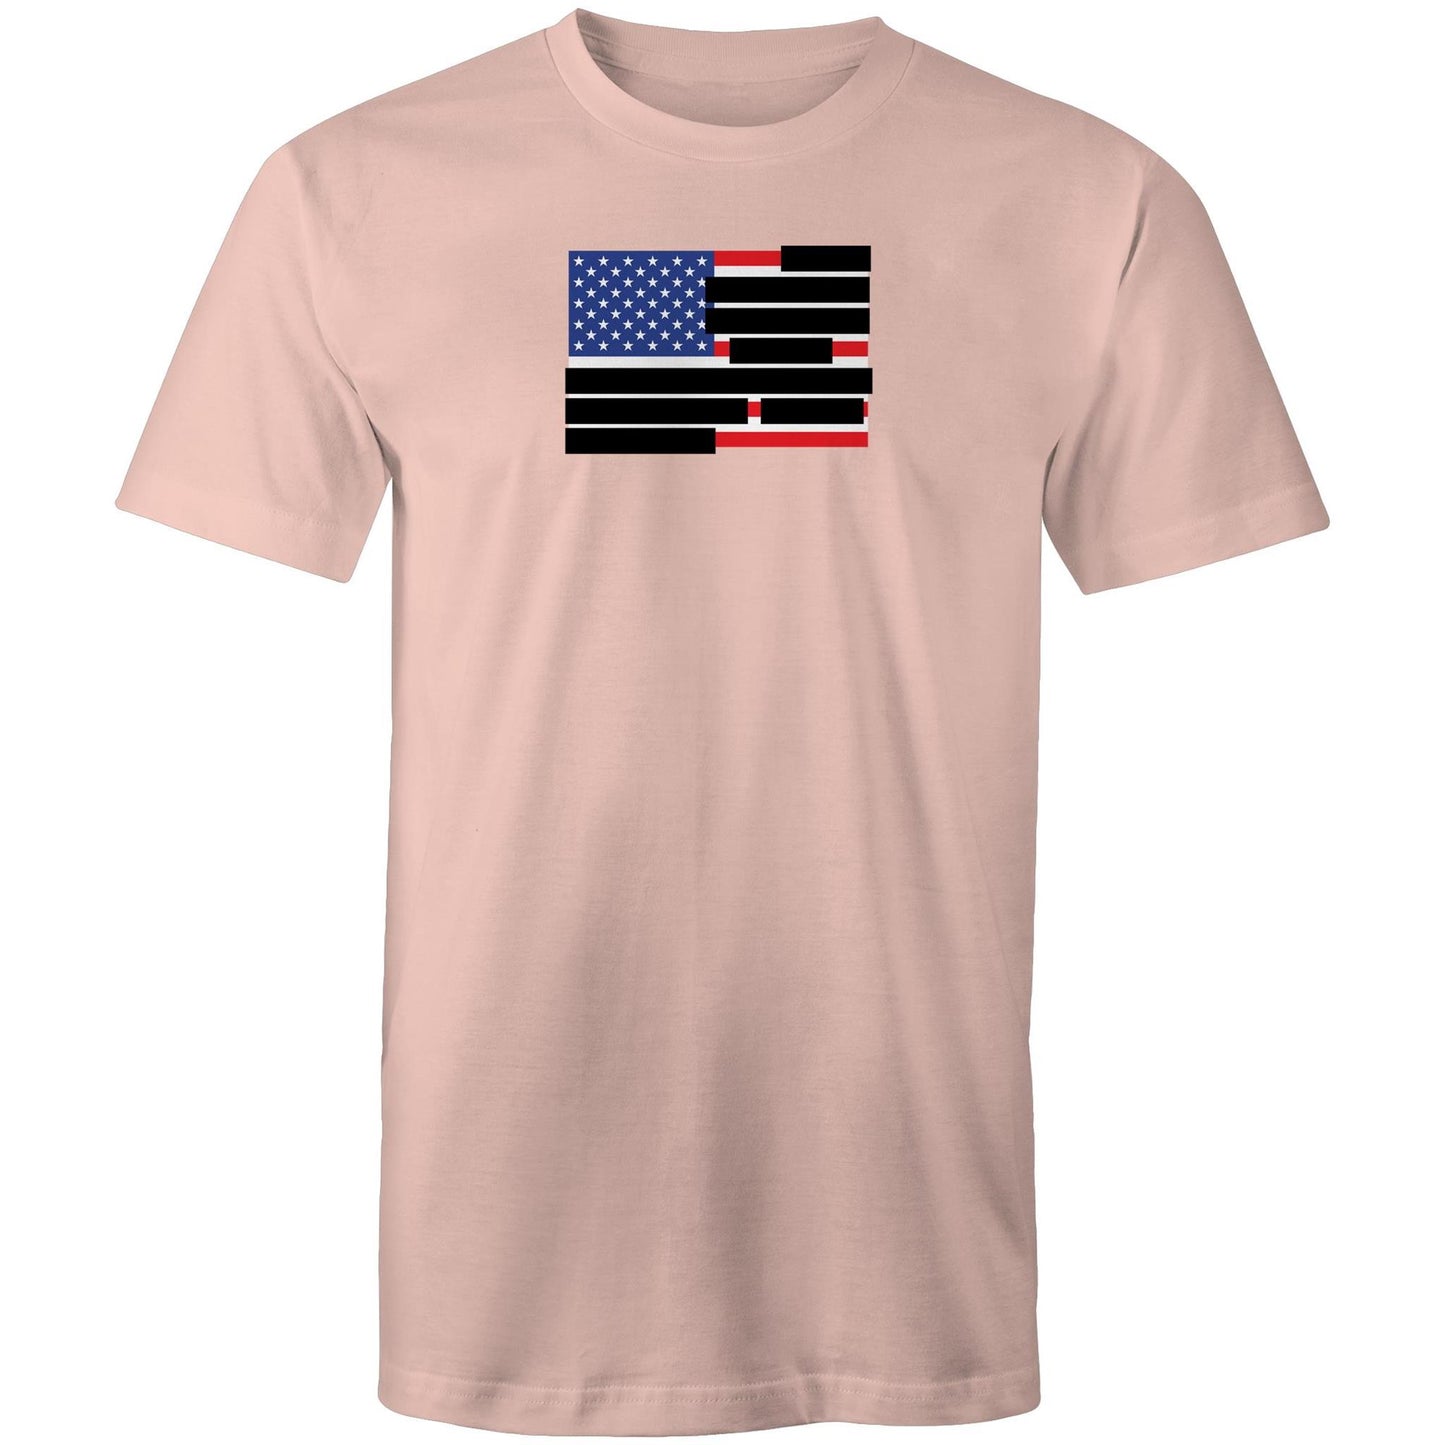 US Flag Redacted T Shirts for Men (Unisex)